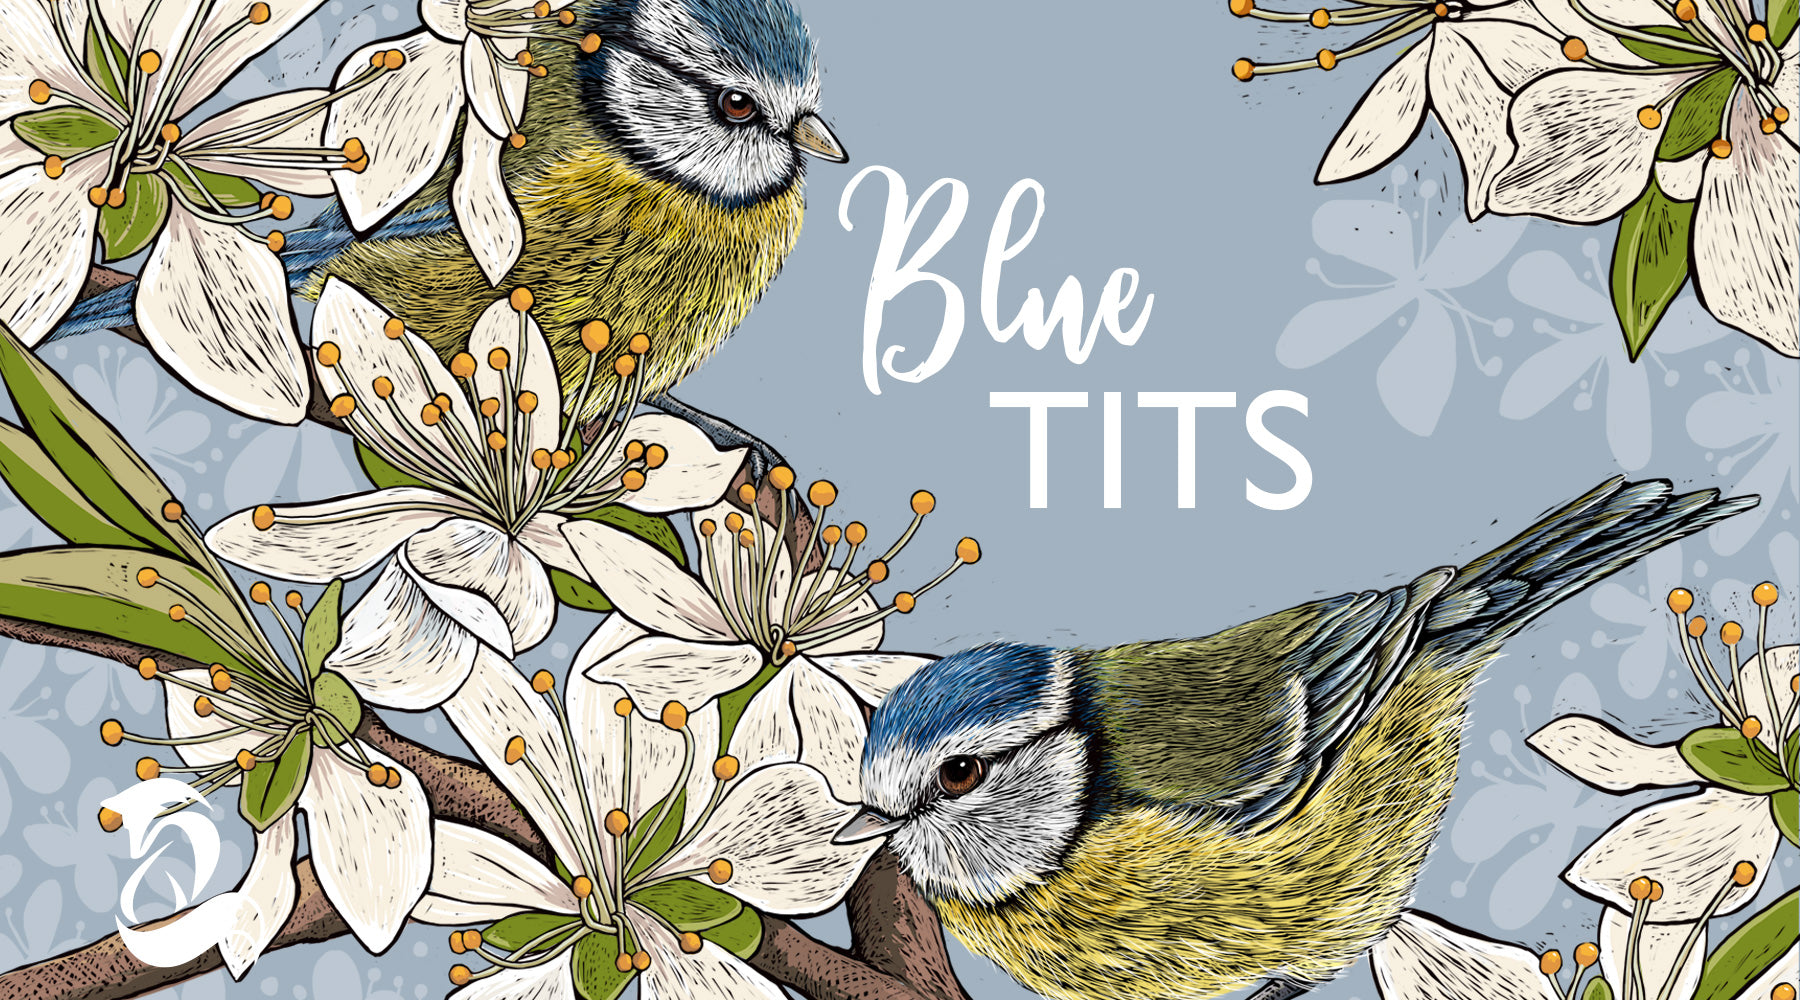 Fox and Boo; Designer Homeware and Greetings; Slider image of Blue Tits design with overlay text 'Blue Tits'